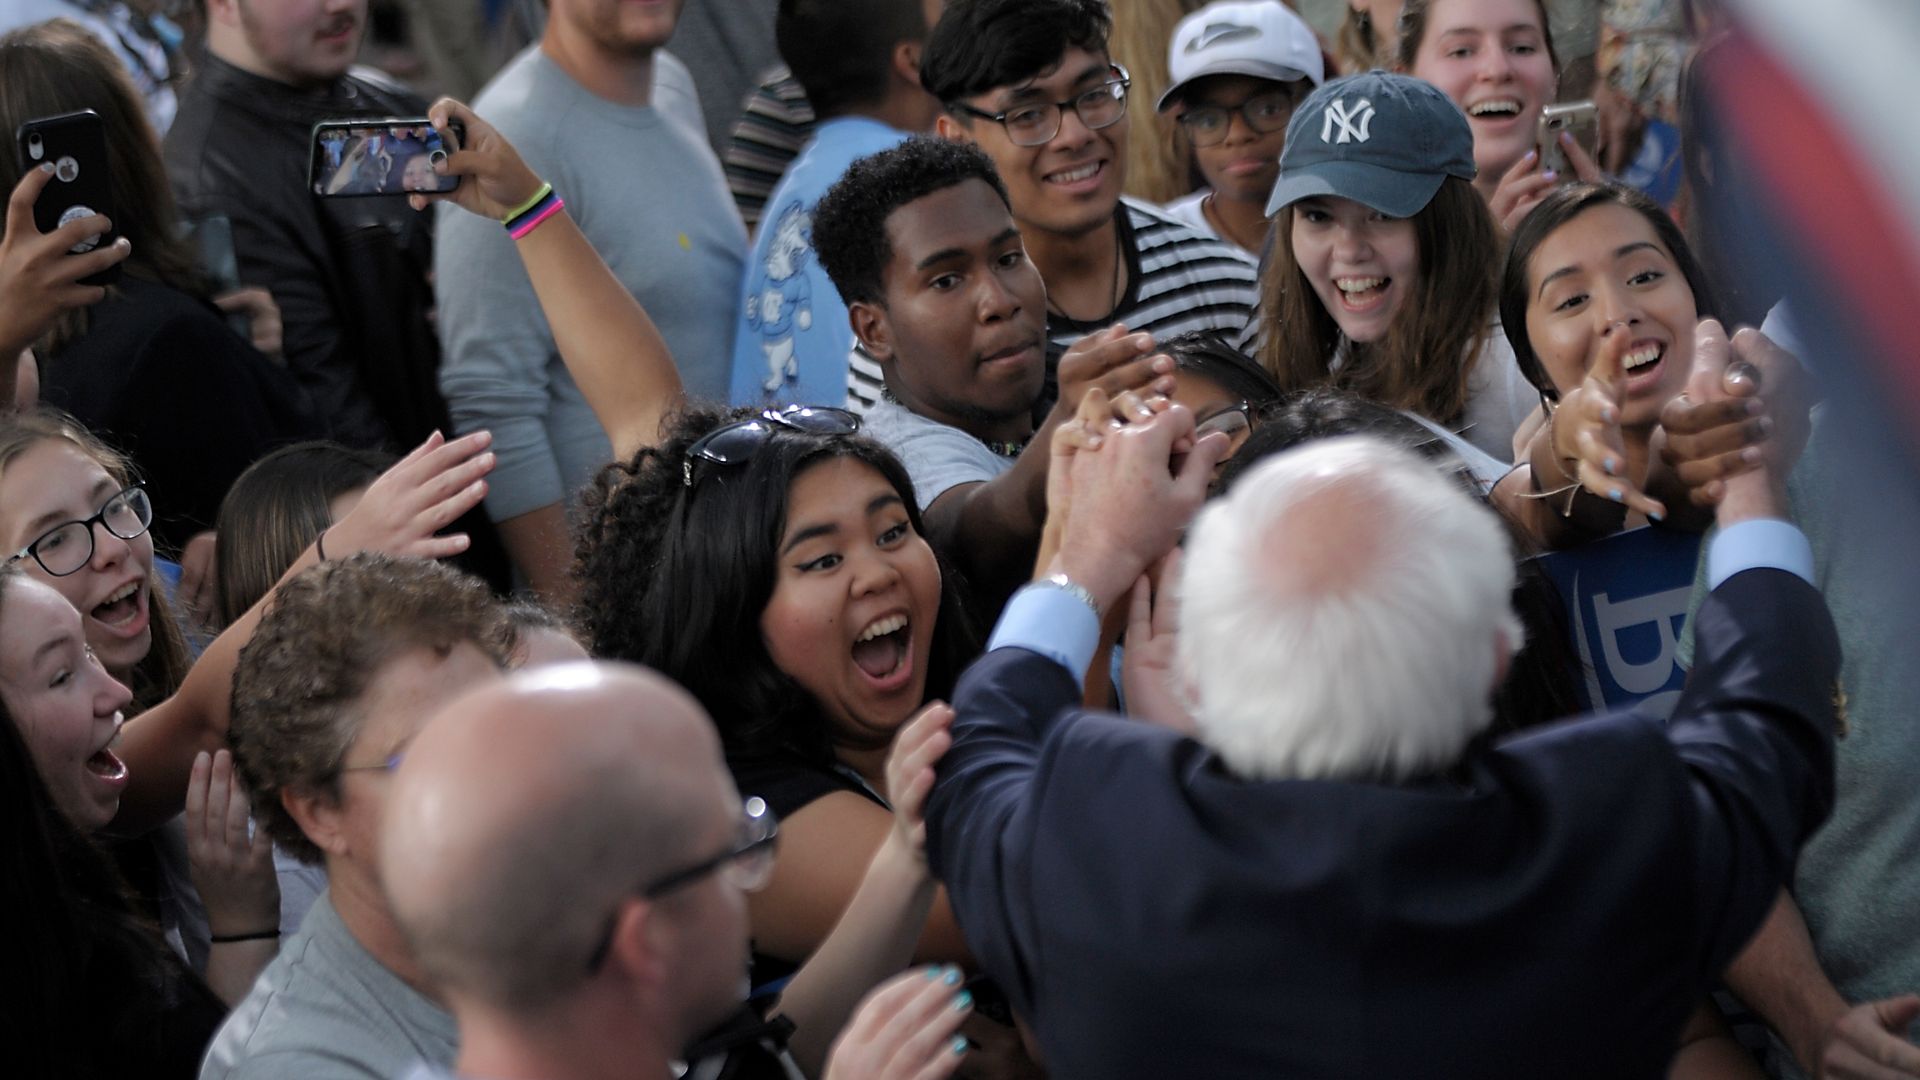 Democratic presidential candidate Sen. Bernie Sanders (I-VT) shakes hands with supporters on the campus of the University of Chapel Hill on September 19, 2019 in Chapel Hill, North Carolina